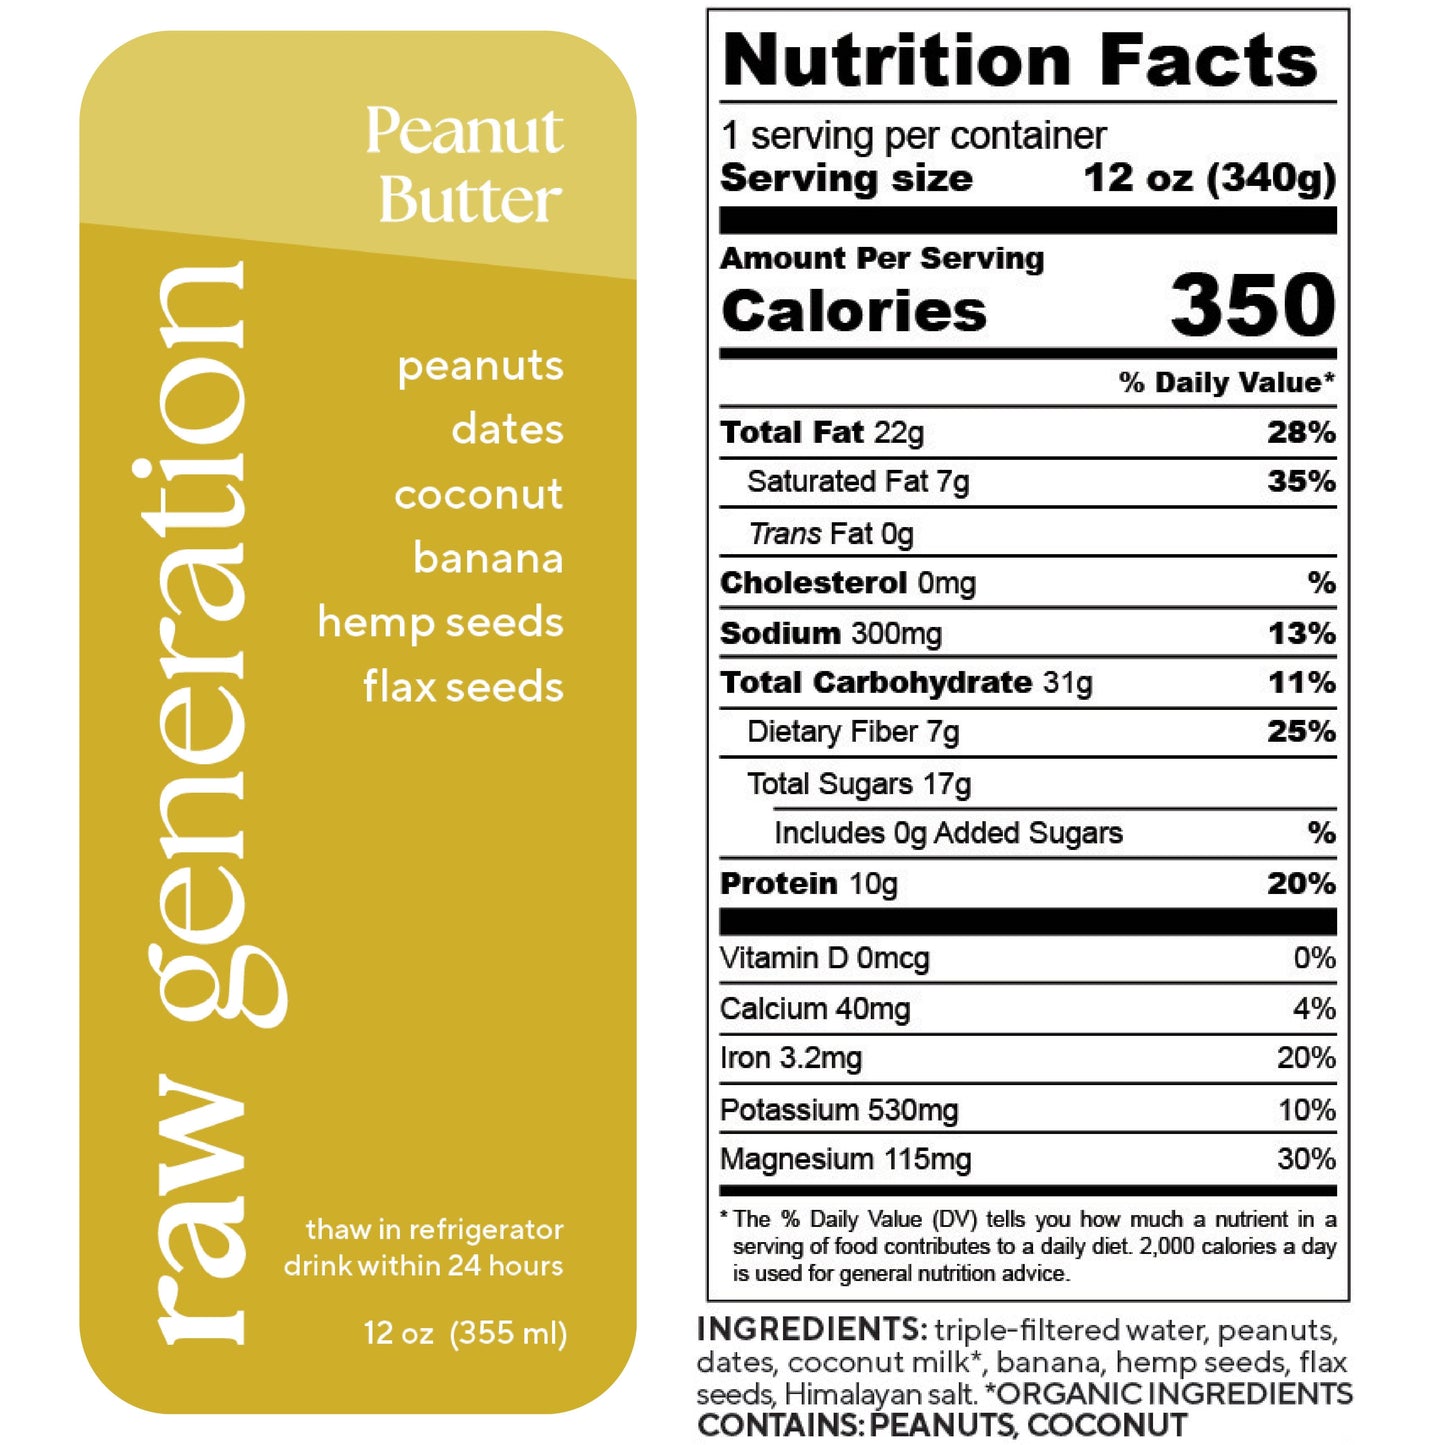 Nutrition Facts for a 12 oz (340g) serving, 1 serving/container: Calories 350, Total Fat 22g, Saturated Fat 7g, Trans Fat 0g, Cholesterol 0mg, Sodium 300mg, Total Carbohydrate 31g, Dietary Fiber 7g, Total Sugars 17g, Added Sugars 0g, Protein 10g; Vitamin D 0mcg, Calcium 40mg, Iron 3.2mg, Potassium 530mg, Magnesium 115mg. Ingredients used: triple-filtered water, peanuts, dates, organic coconut milk, banana, hemp seeds, flax seeds, and Himalayan salt. WARNING: CONTAINS PEANUTS AND COCONUT.